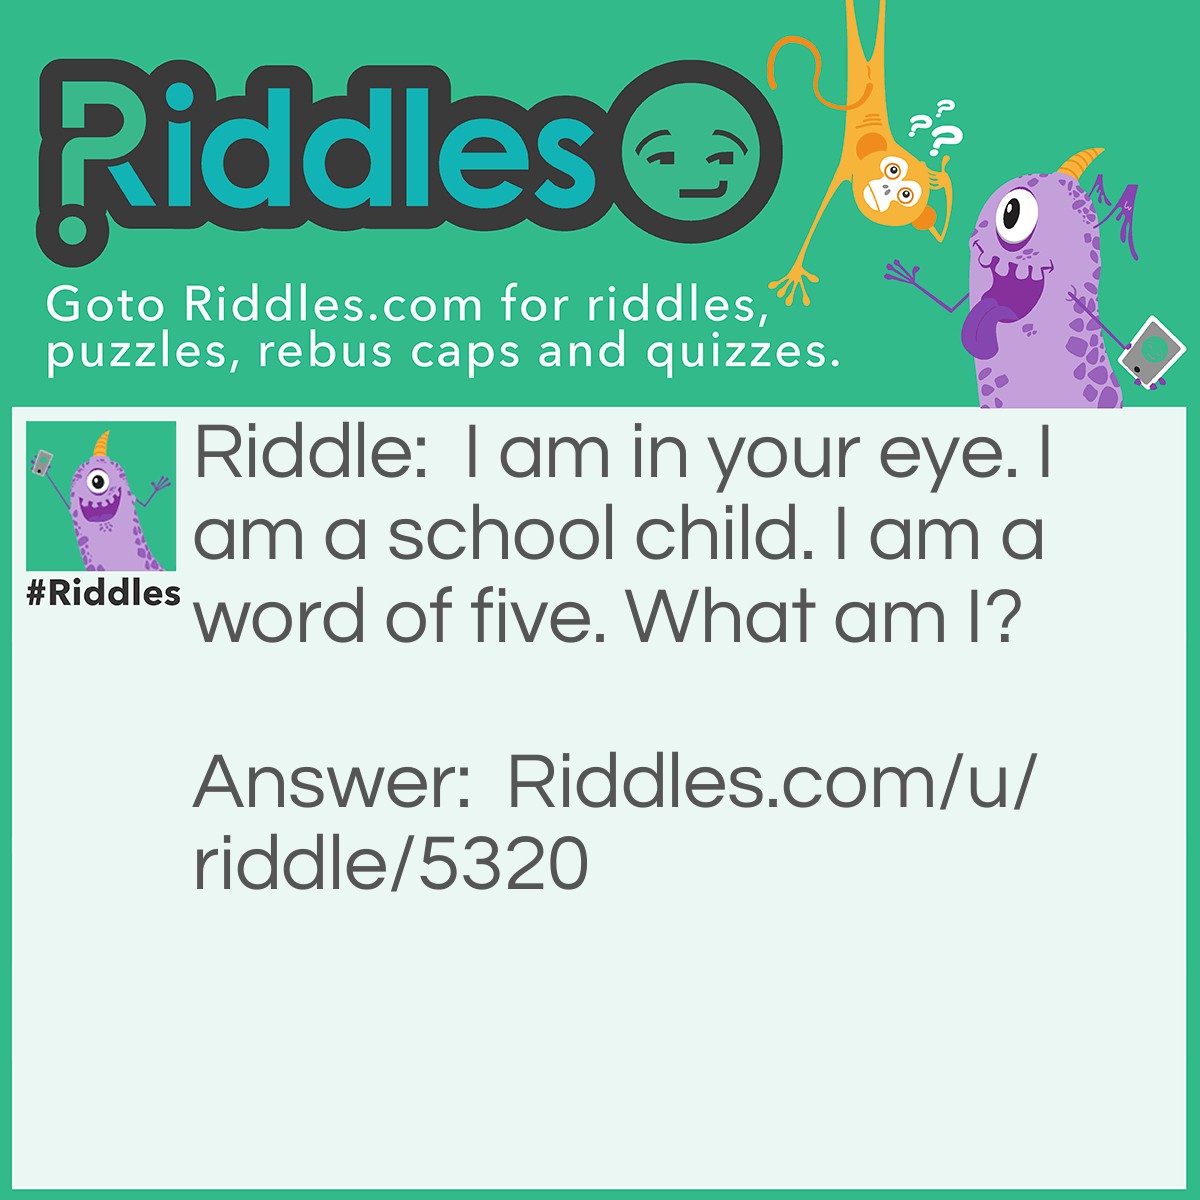 Riddle: I am in your eye. I am a school child. I am a word of five. What am I? Answer: Pupil.